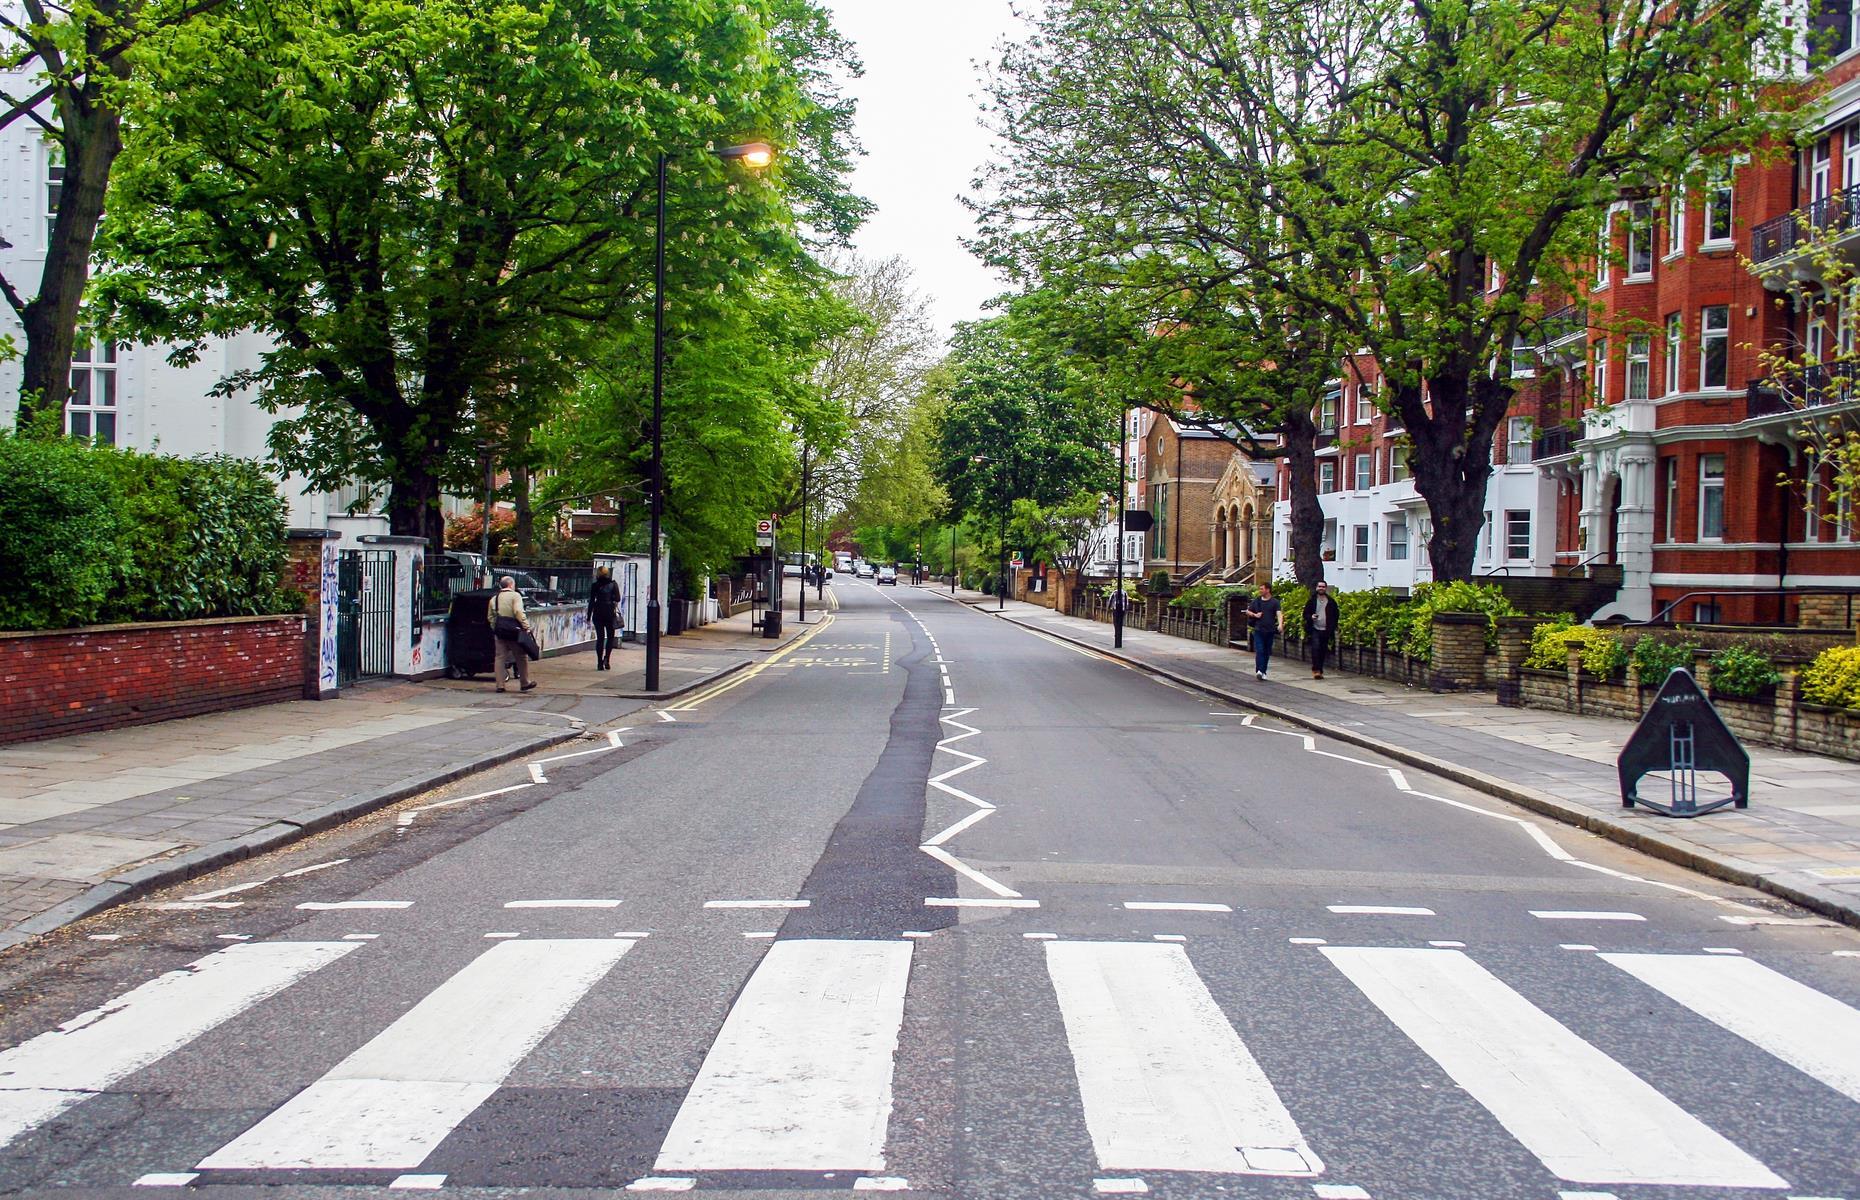 <p>Probably England’s most iconic zebra crossing, Beatles fans will certainly recognise this road in northwest London. The street rose to fame as the location of Abbey Road Studios, which was used by the 1960s rock band who also featured it on the cover of their 1969 album of the same name. Since then, the crossing has been given Grade II-listed status and typically attracts tourists from all over the world wanting to recreate the famous image of the band walking across. </p>